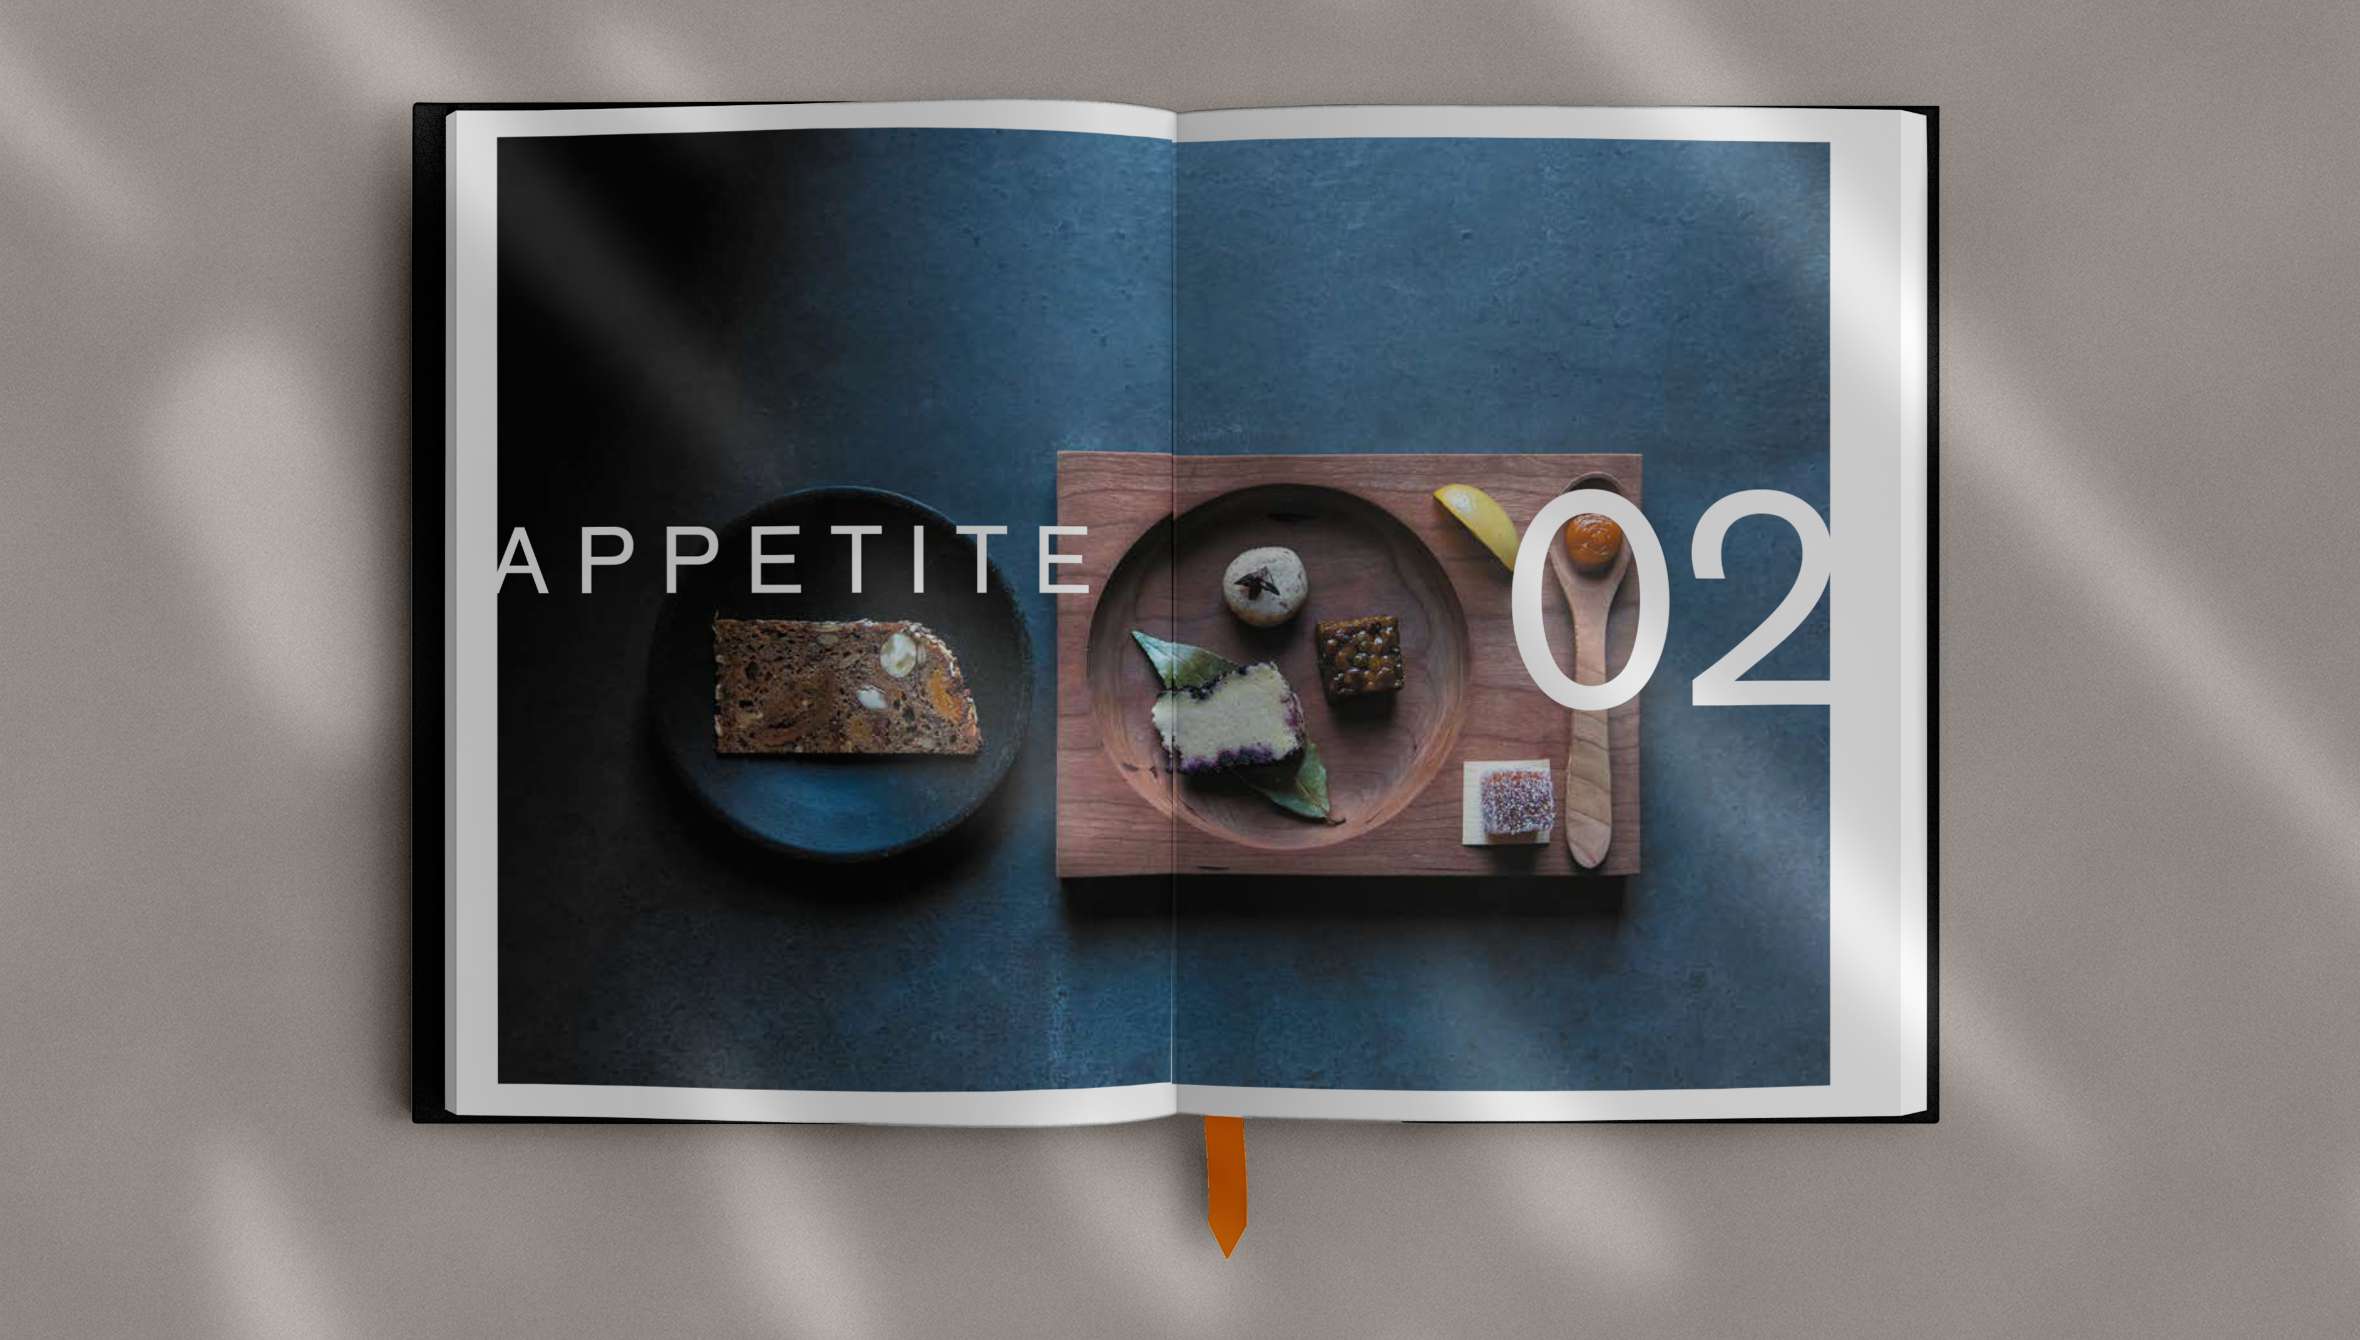 Little Black Book of Milan open at section 2, appetite